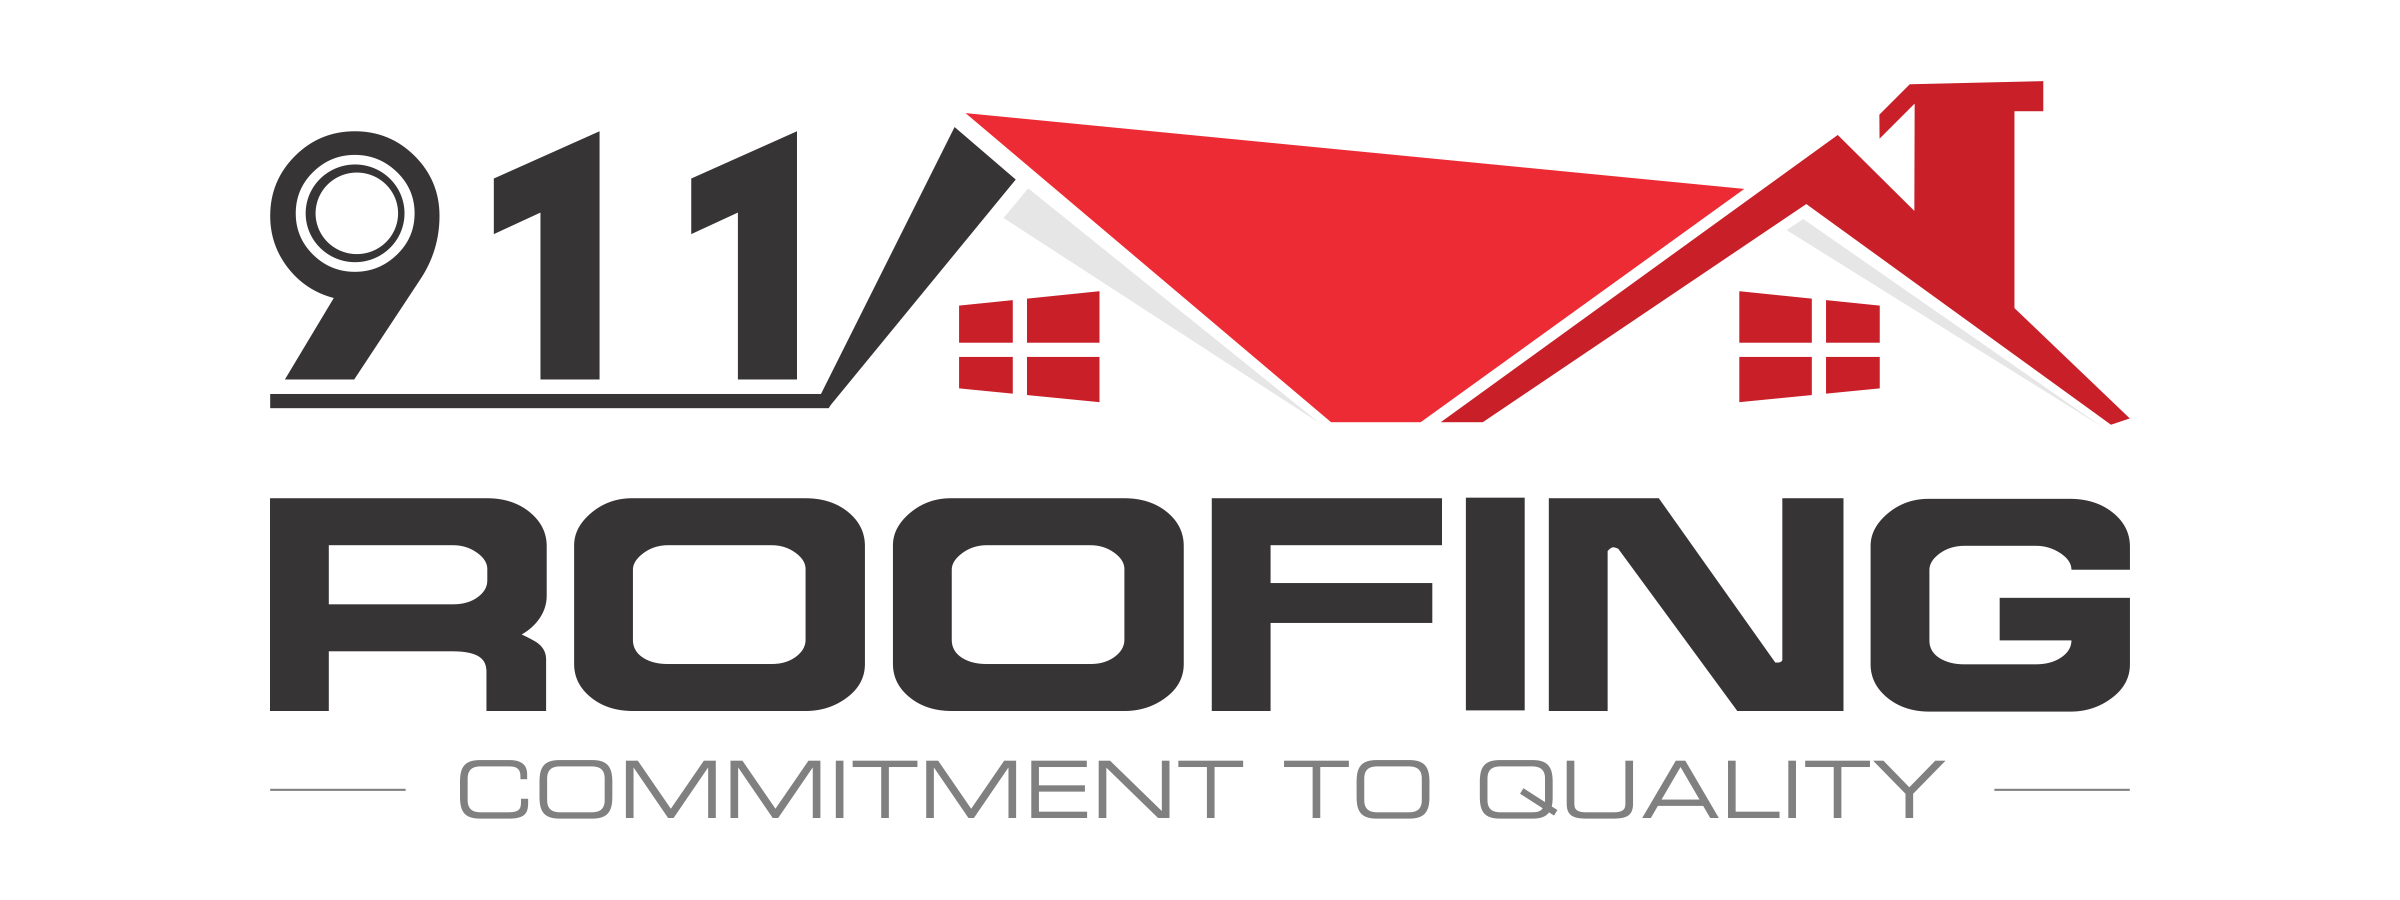 911 Roofing